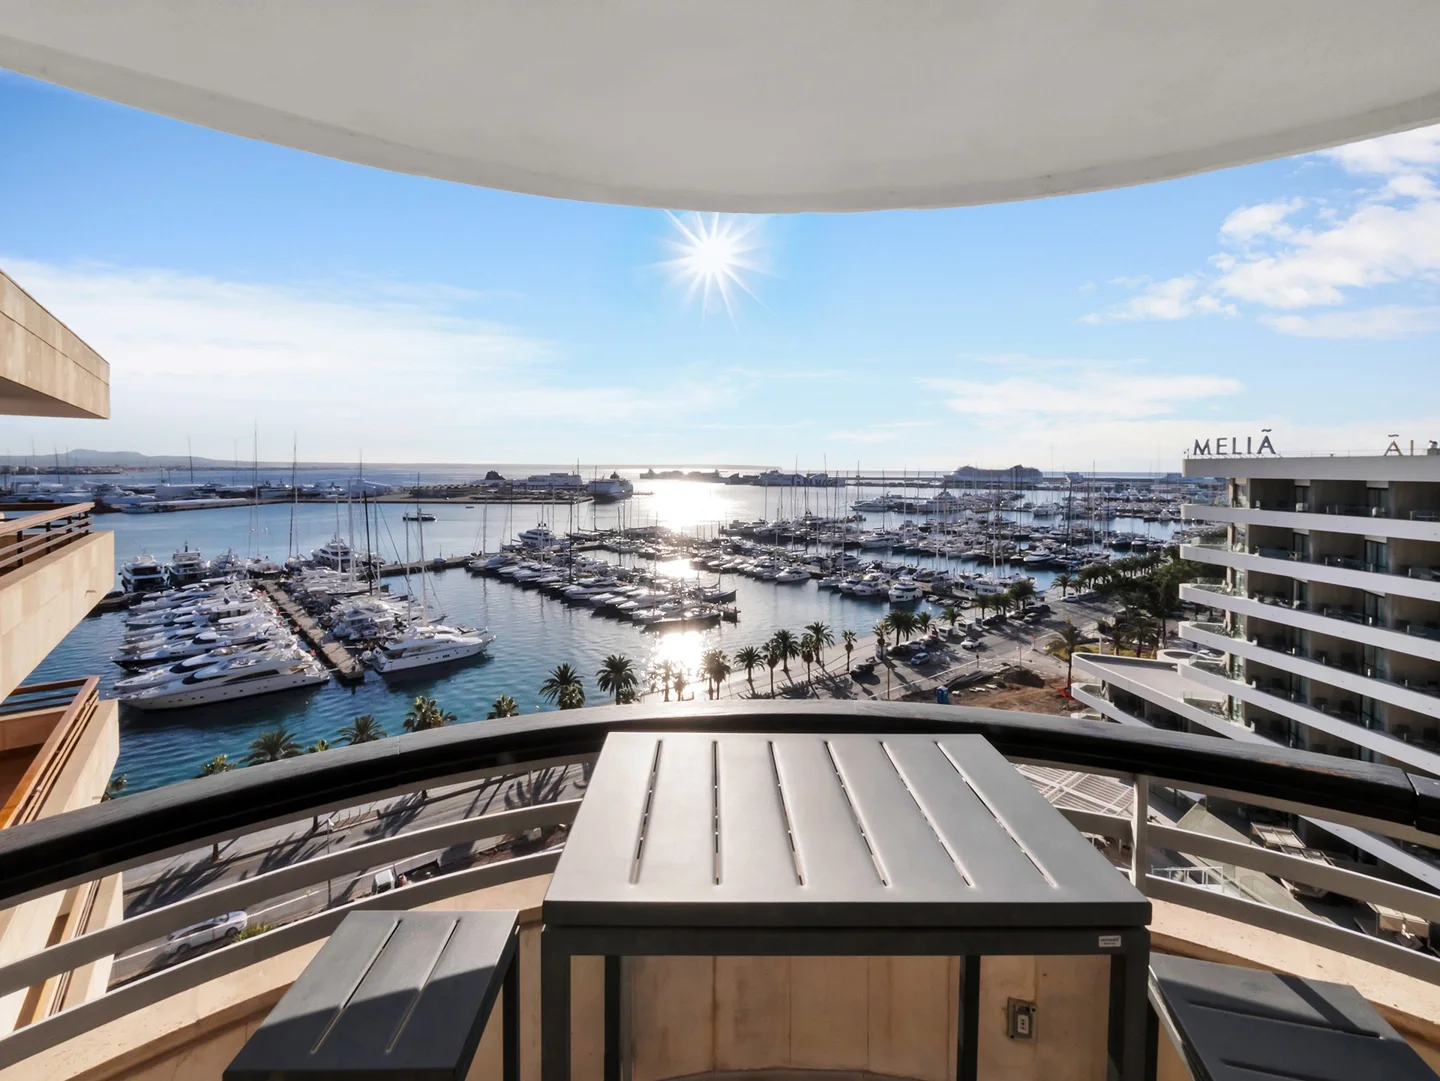 Exclusive penthouse in Palma with fantastic harbour views